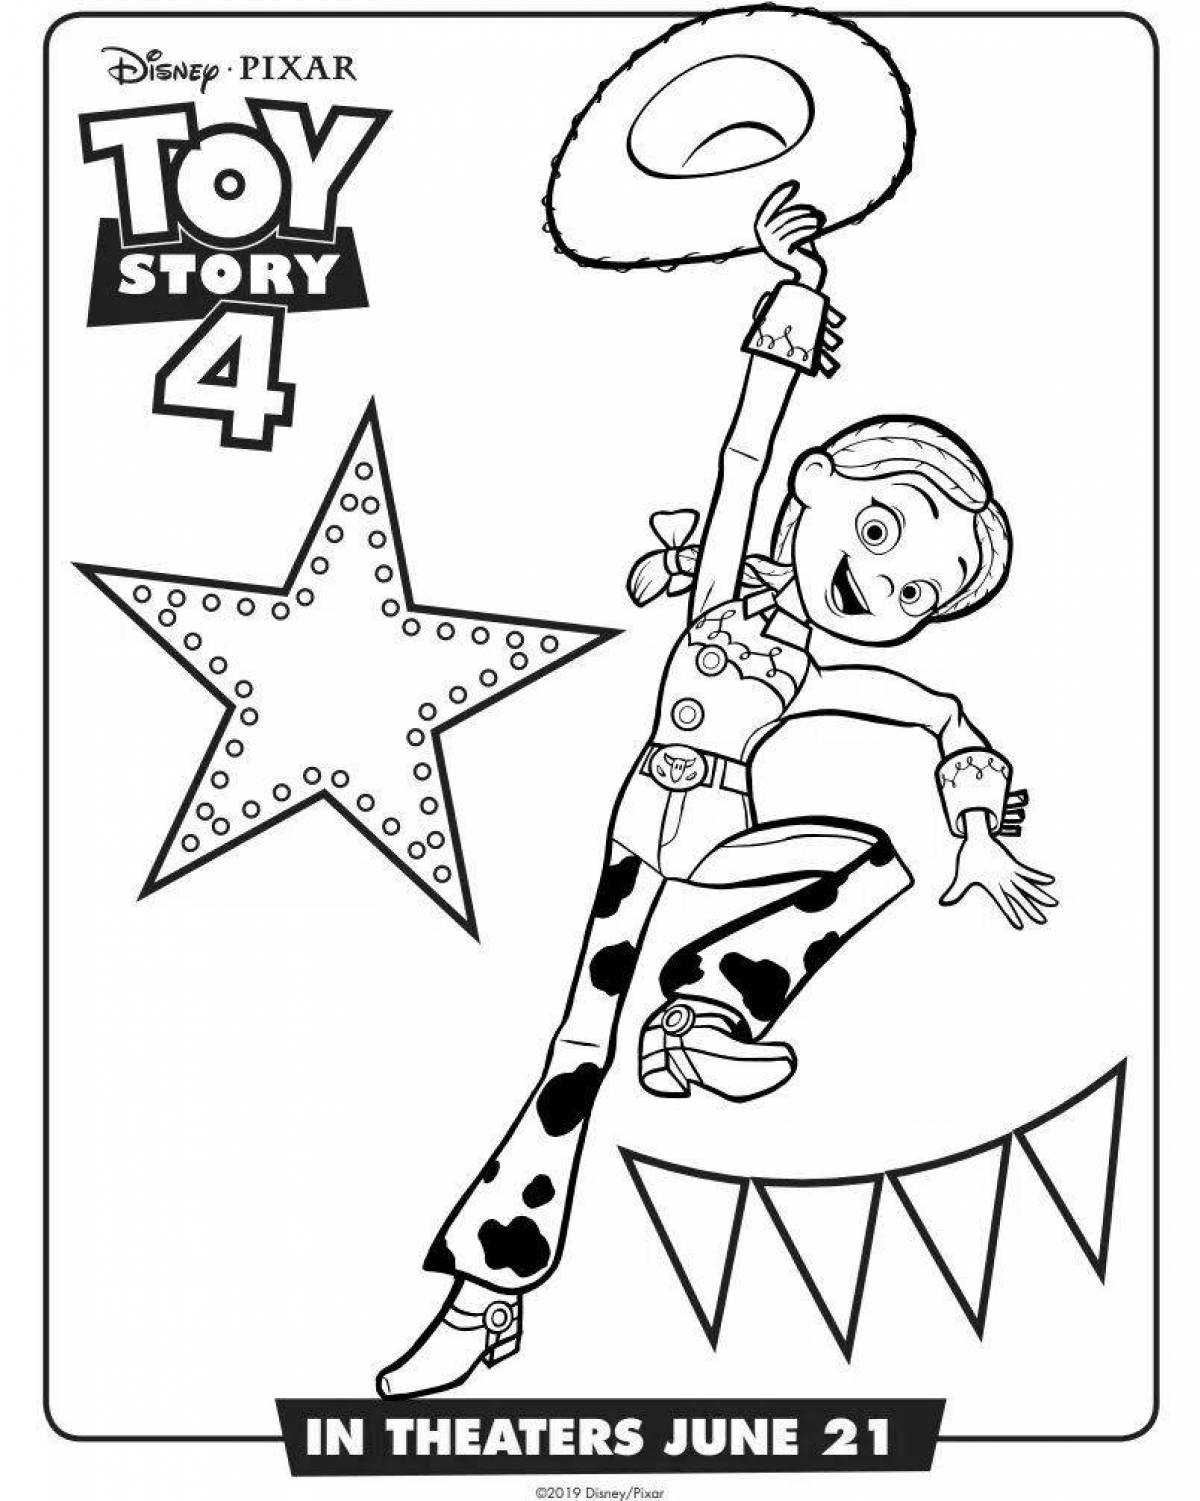 Colorful jessie toy story coloring page